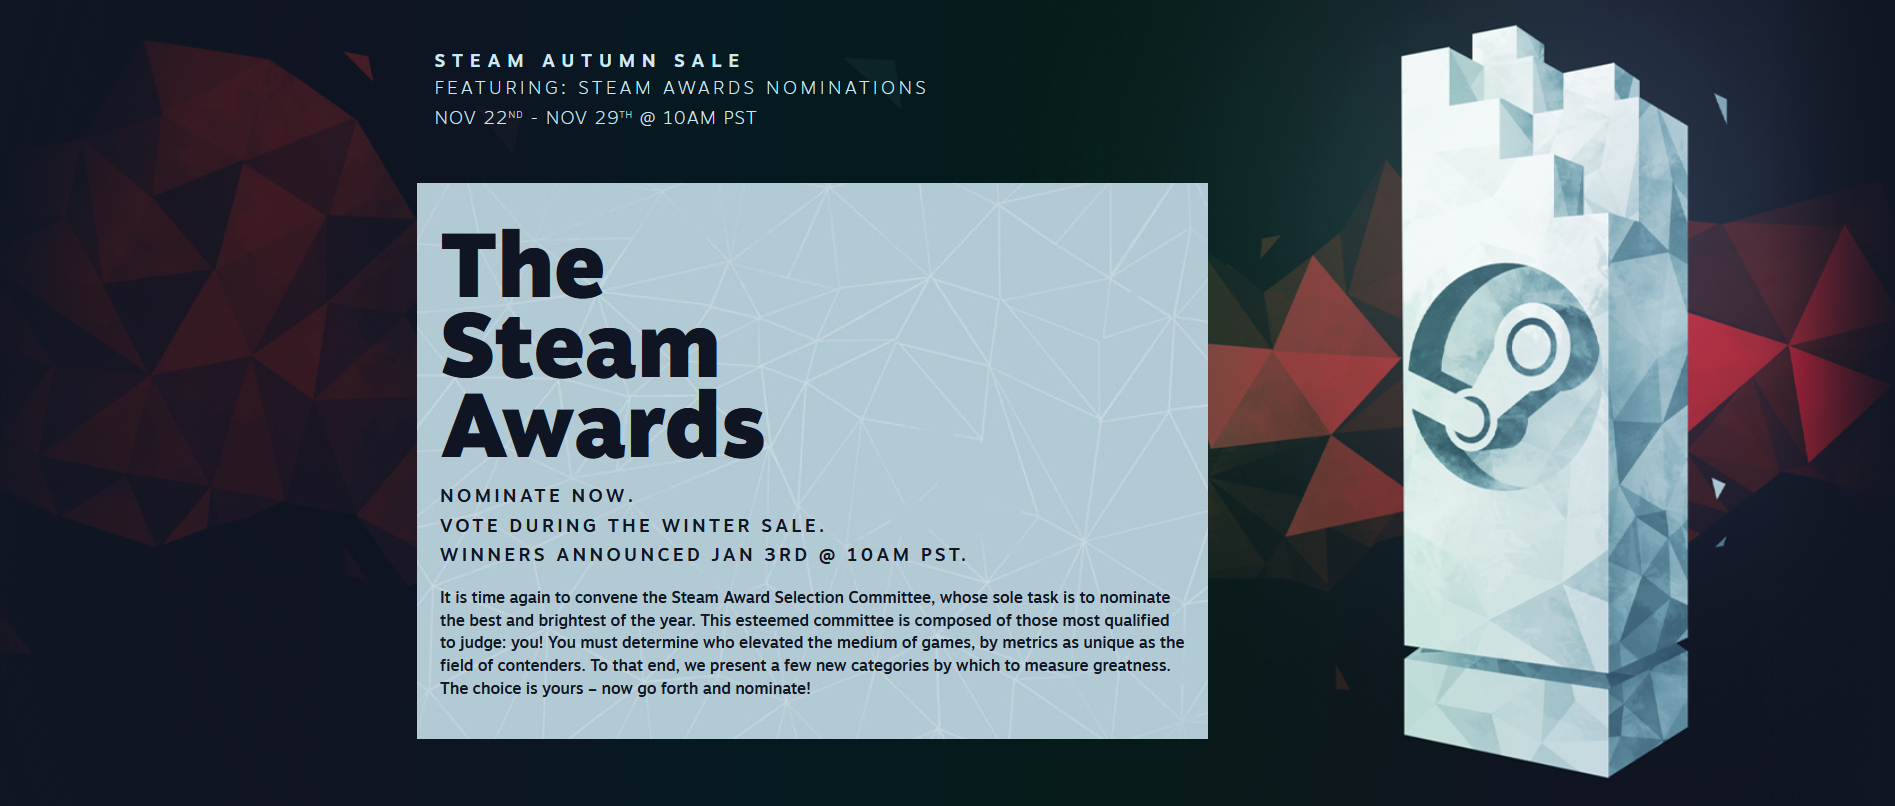 Steam continues the autumn sale until November 29, as well as voting for The Steam Awards, which has 11 nominations-2